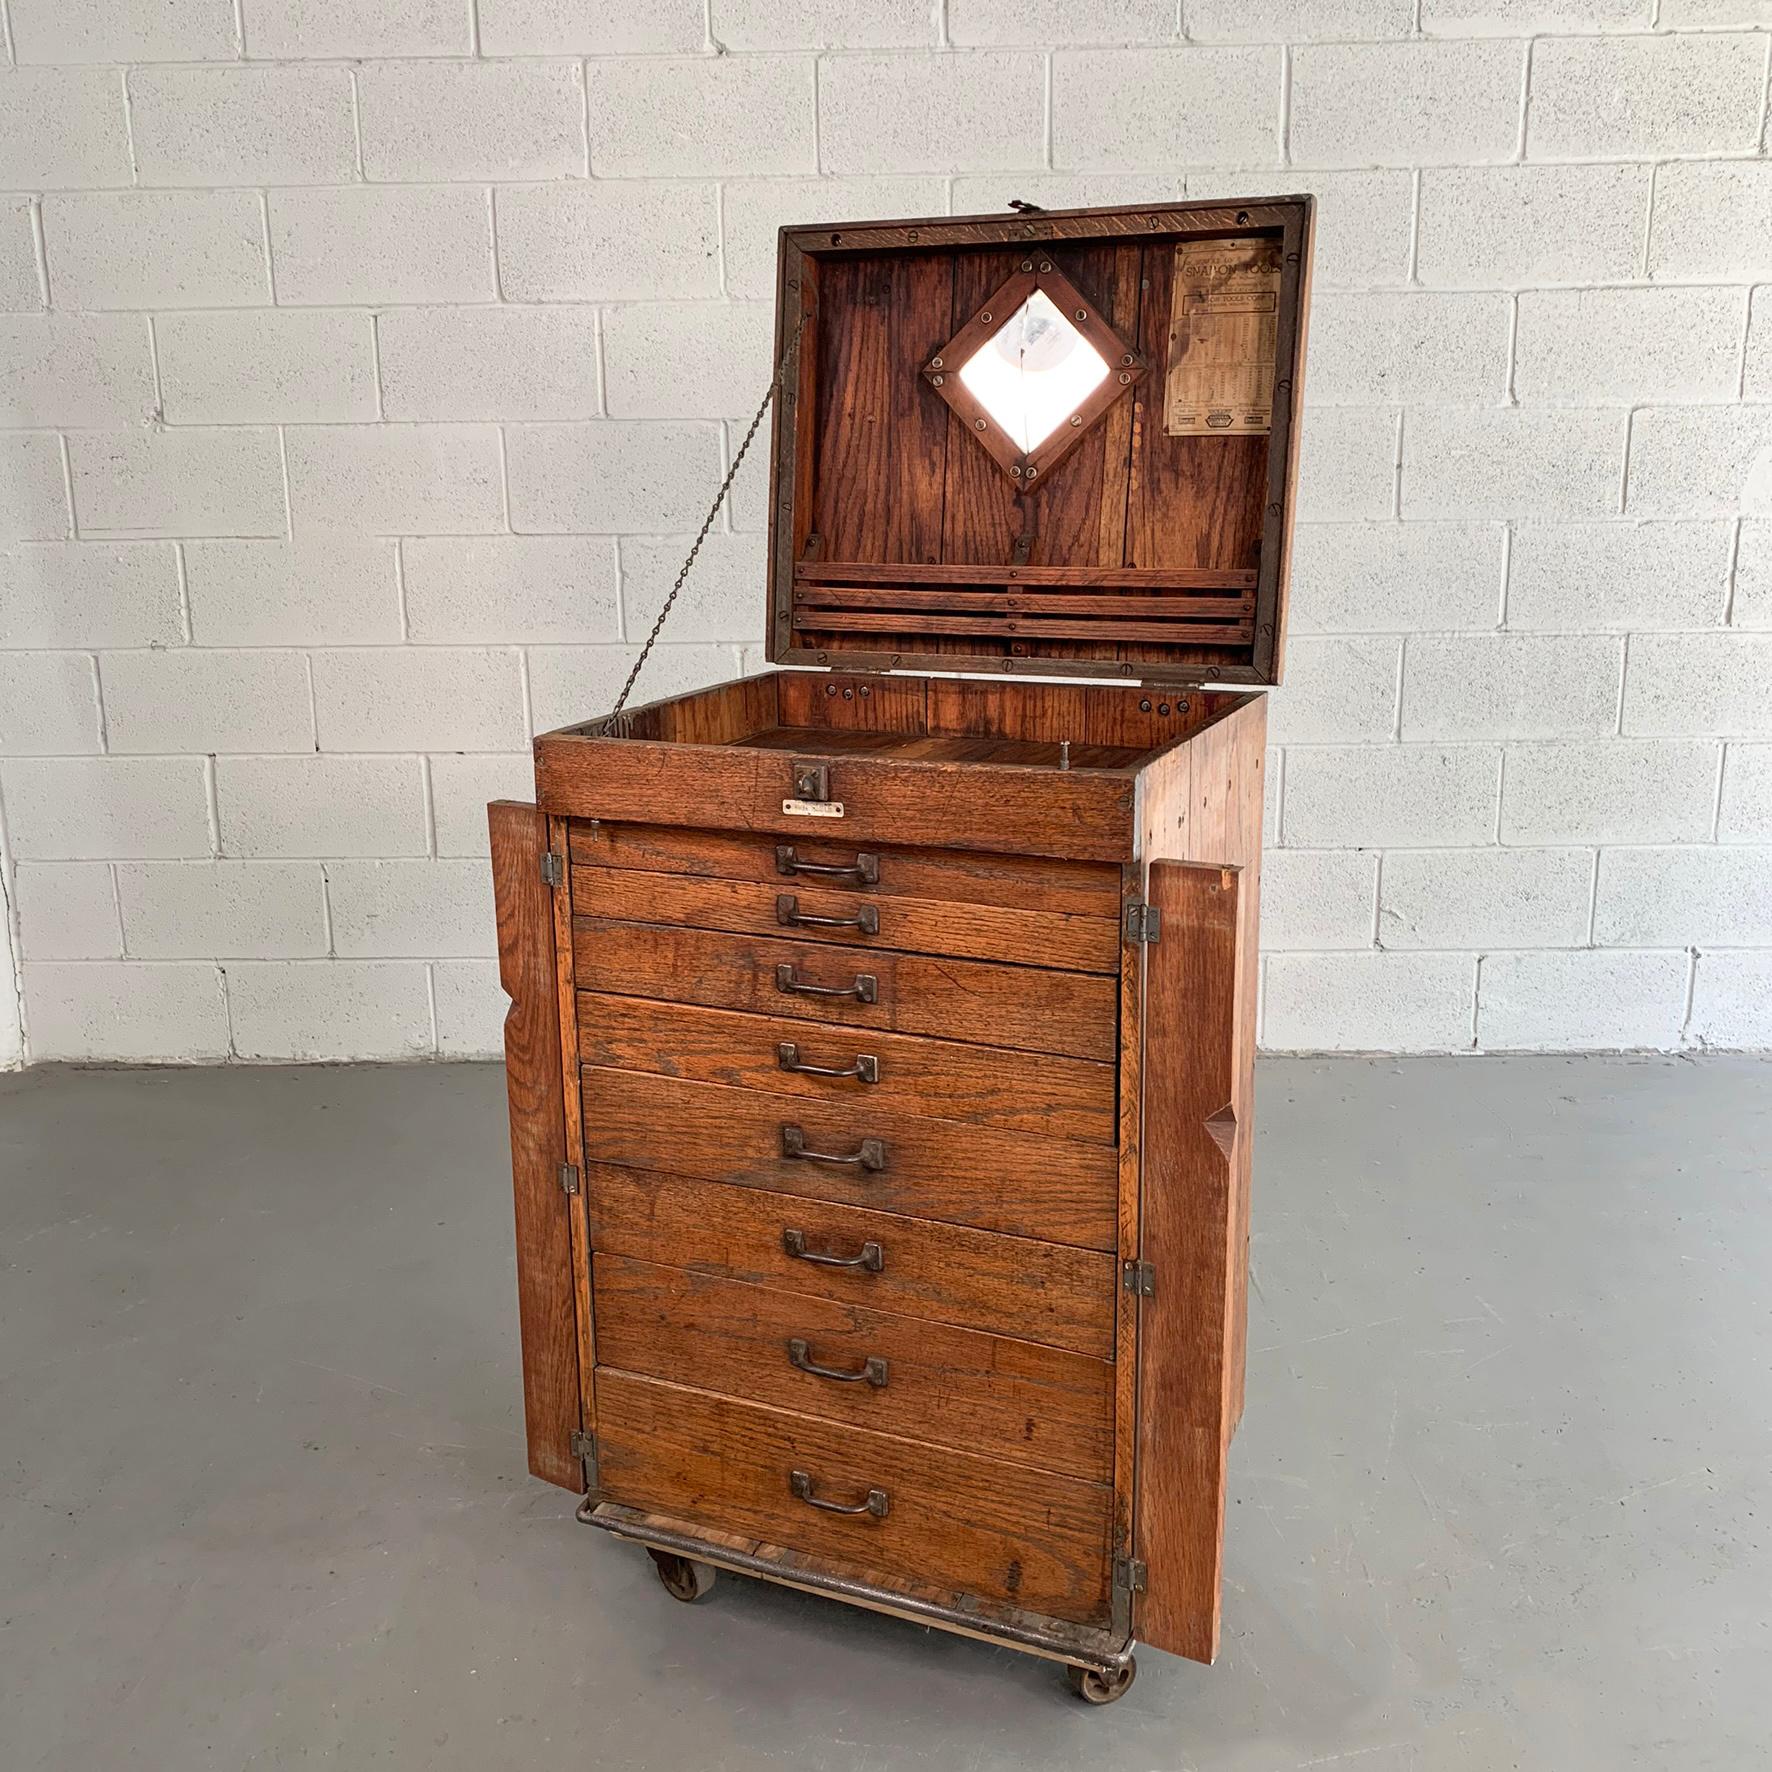 Large, antique, industrial, turn of the century, oak, machinist tool chest cabinet features several divided drawers with cast metal hardware that can be locked with a padlock when closed and rolls on casters. The Snap-On tool chart is a later